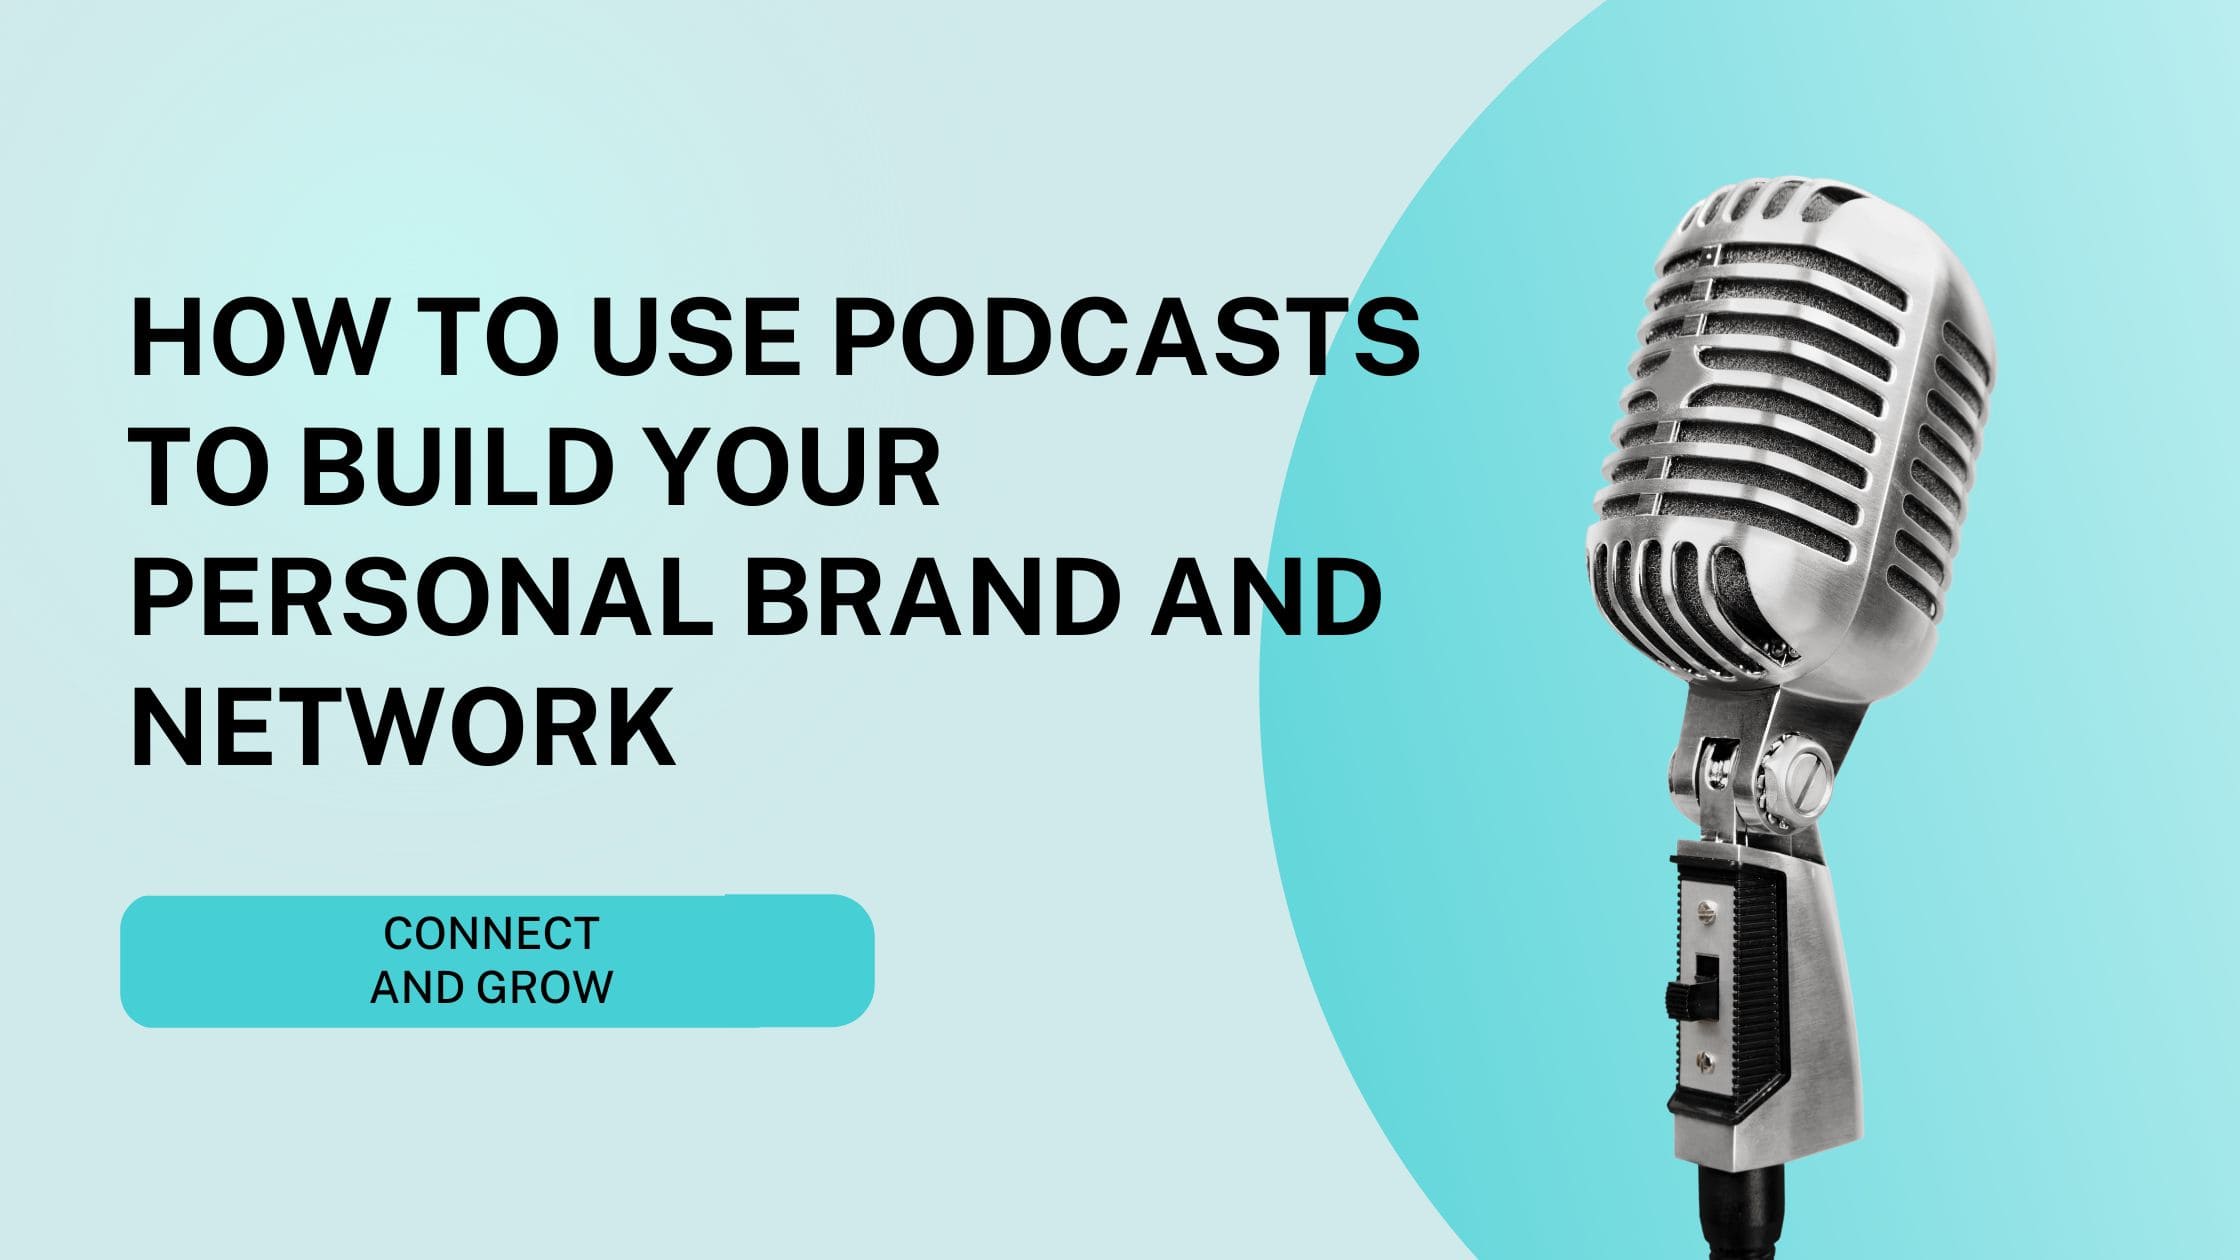 How to Use Podcasts to Build Your Personal Brand and Network - Header